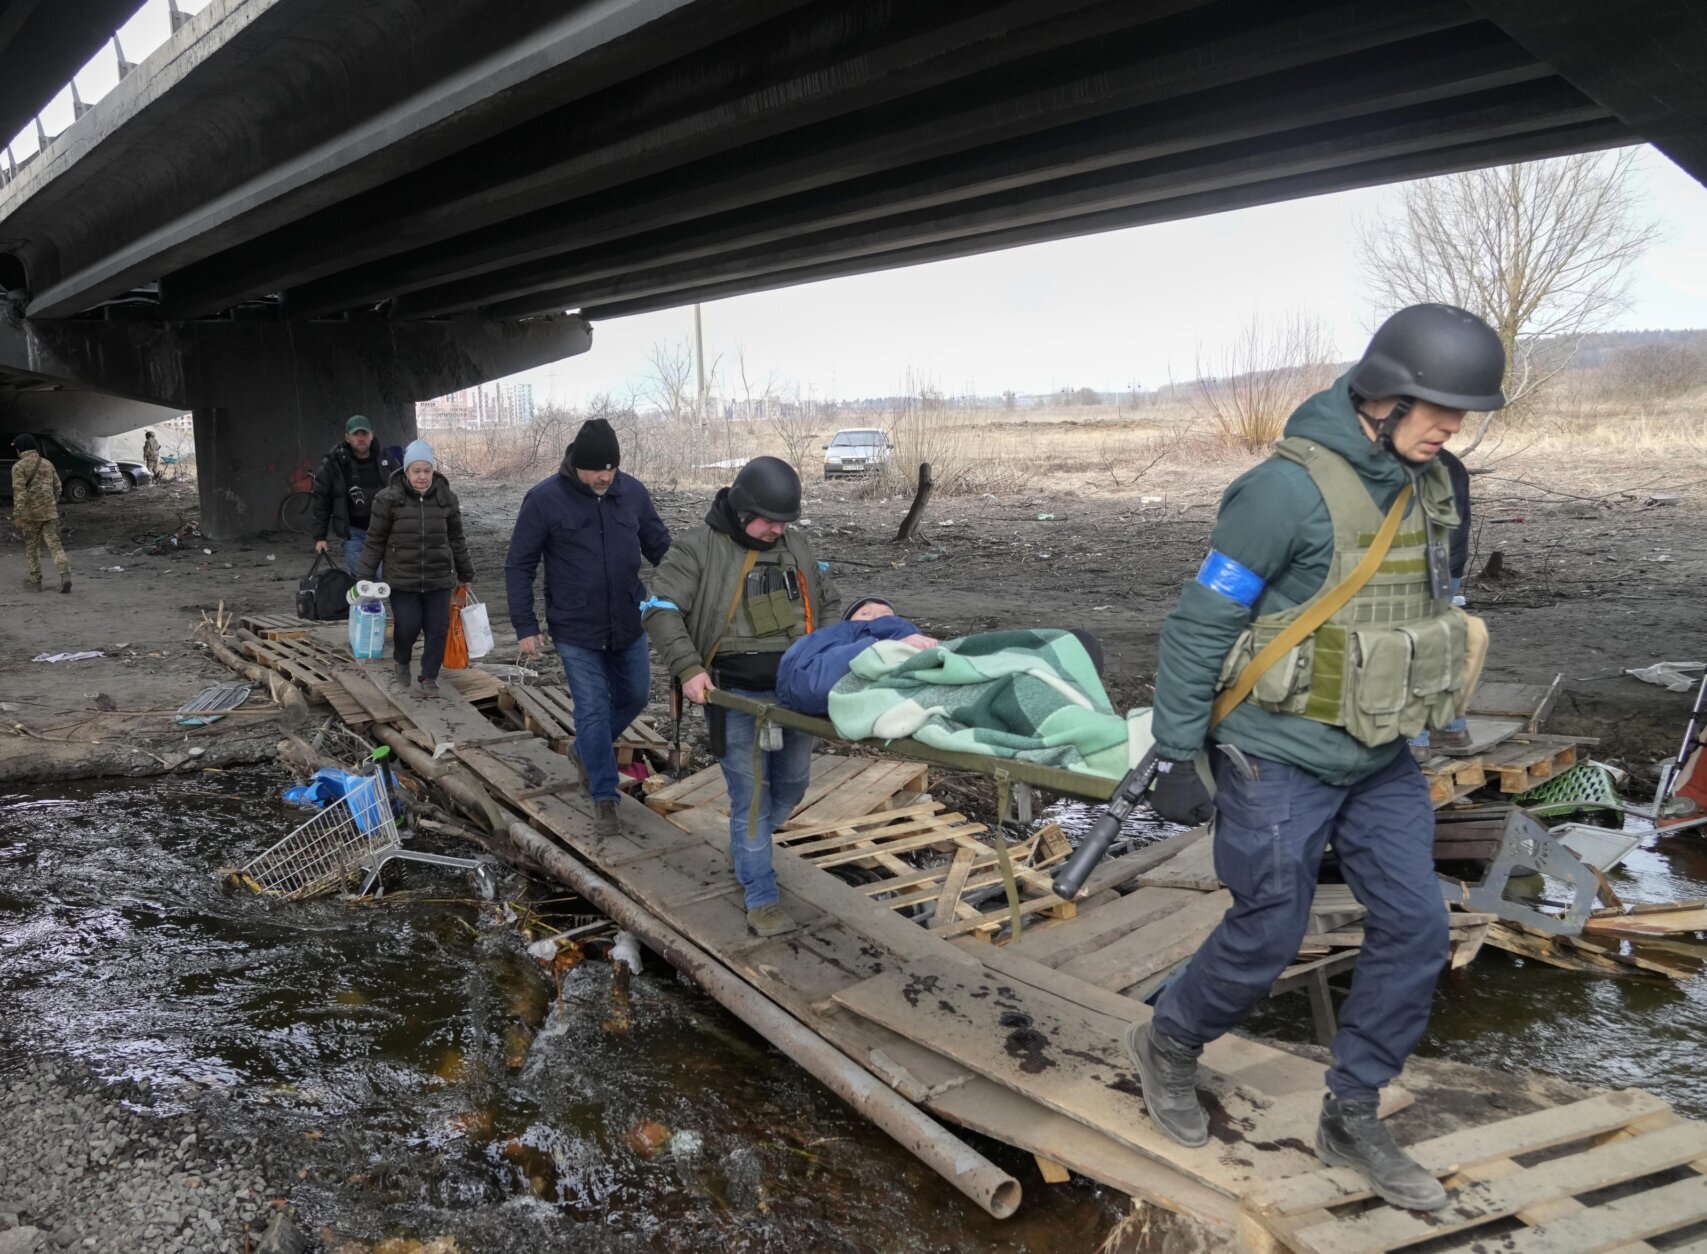 Ukrainians soldiers pass an improvised path under a destroyed bridge as they evacuate an elderly resident in Irpin, northwest of Kyiv, Saturday, March 12, 2022. Kyiv northwest suburbs such as Irpin and Bucha have been enduring Russian shellfire and bombardments for over a week prompting residents to leave their home. (AP Photo/Efrem Lukatsky)